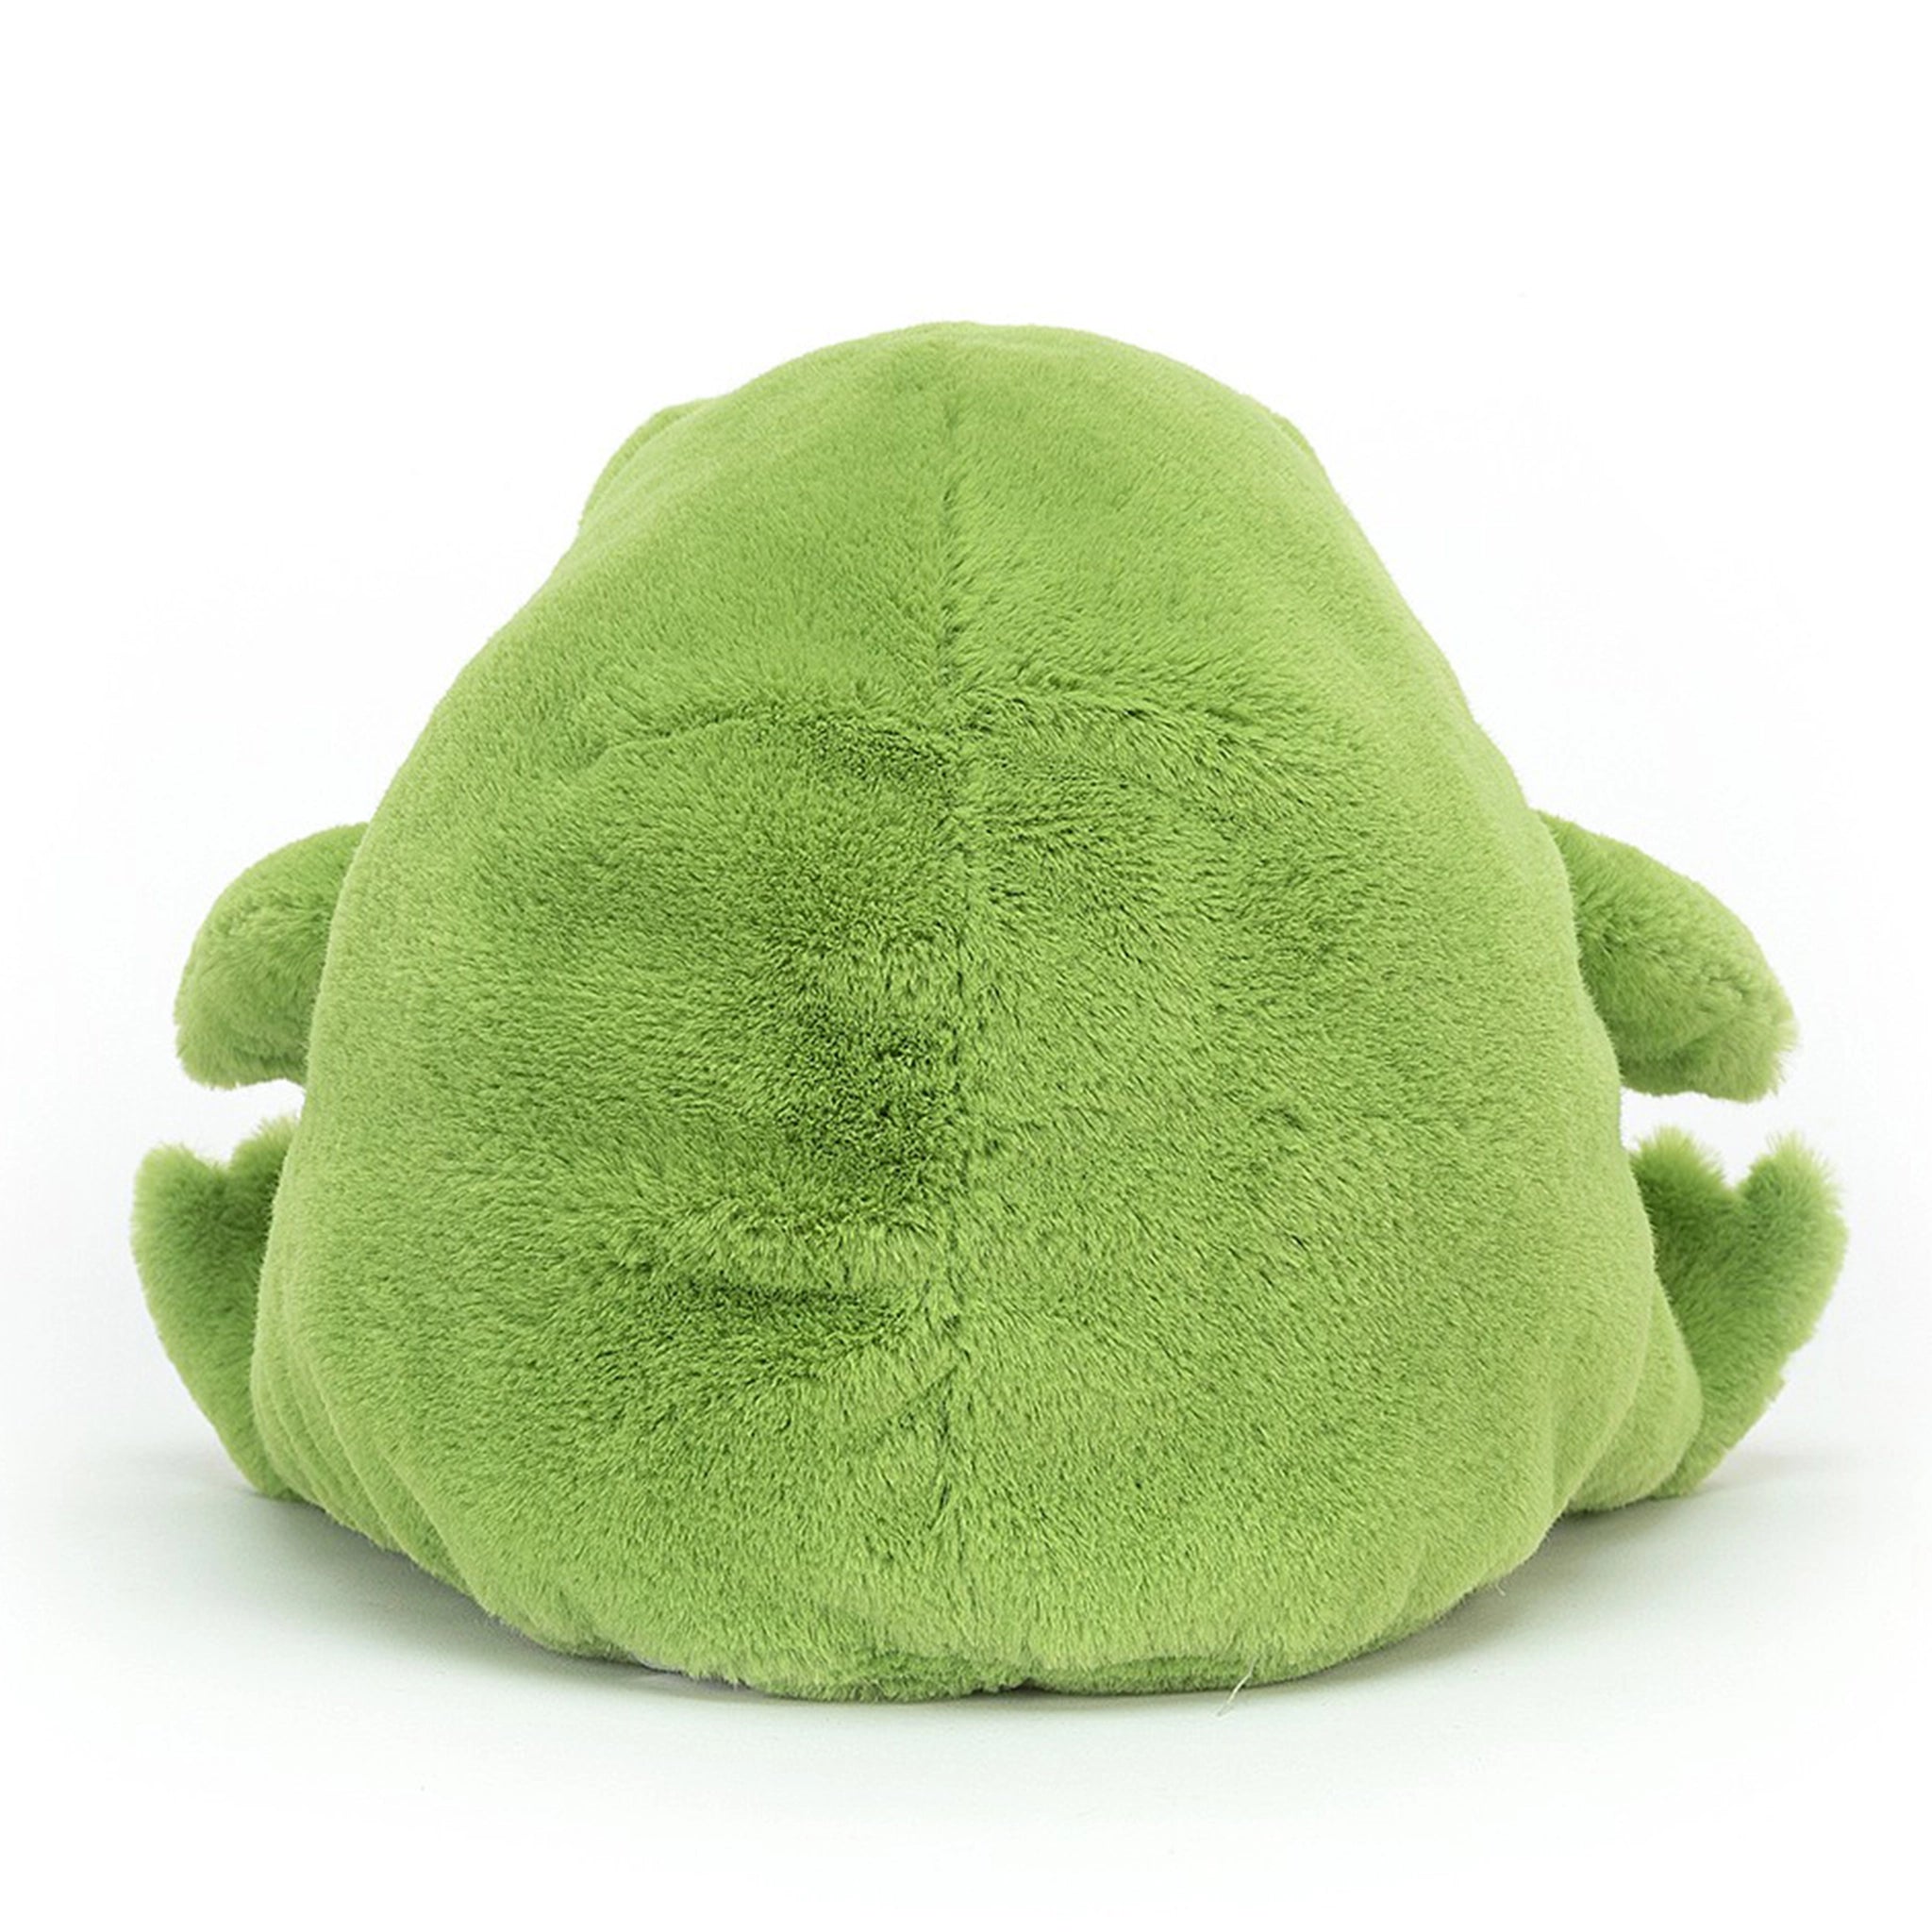 On a white background is a green frog stuffed animal with with a frown face.